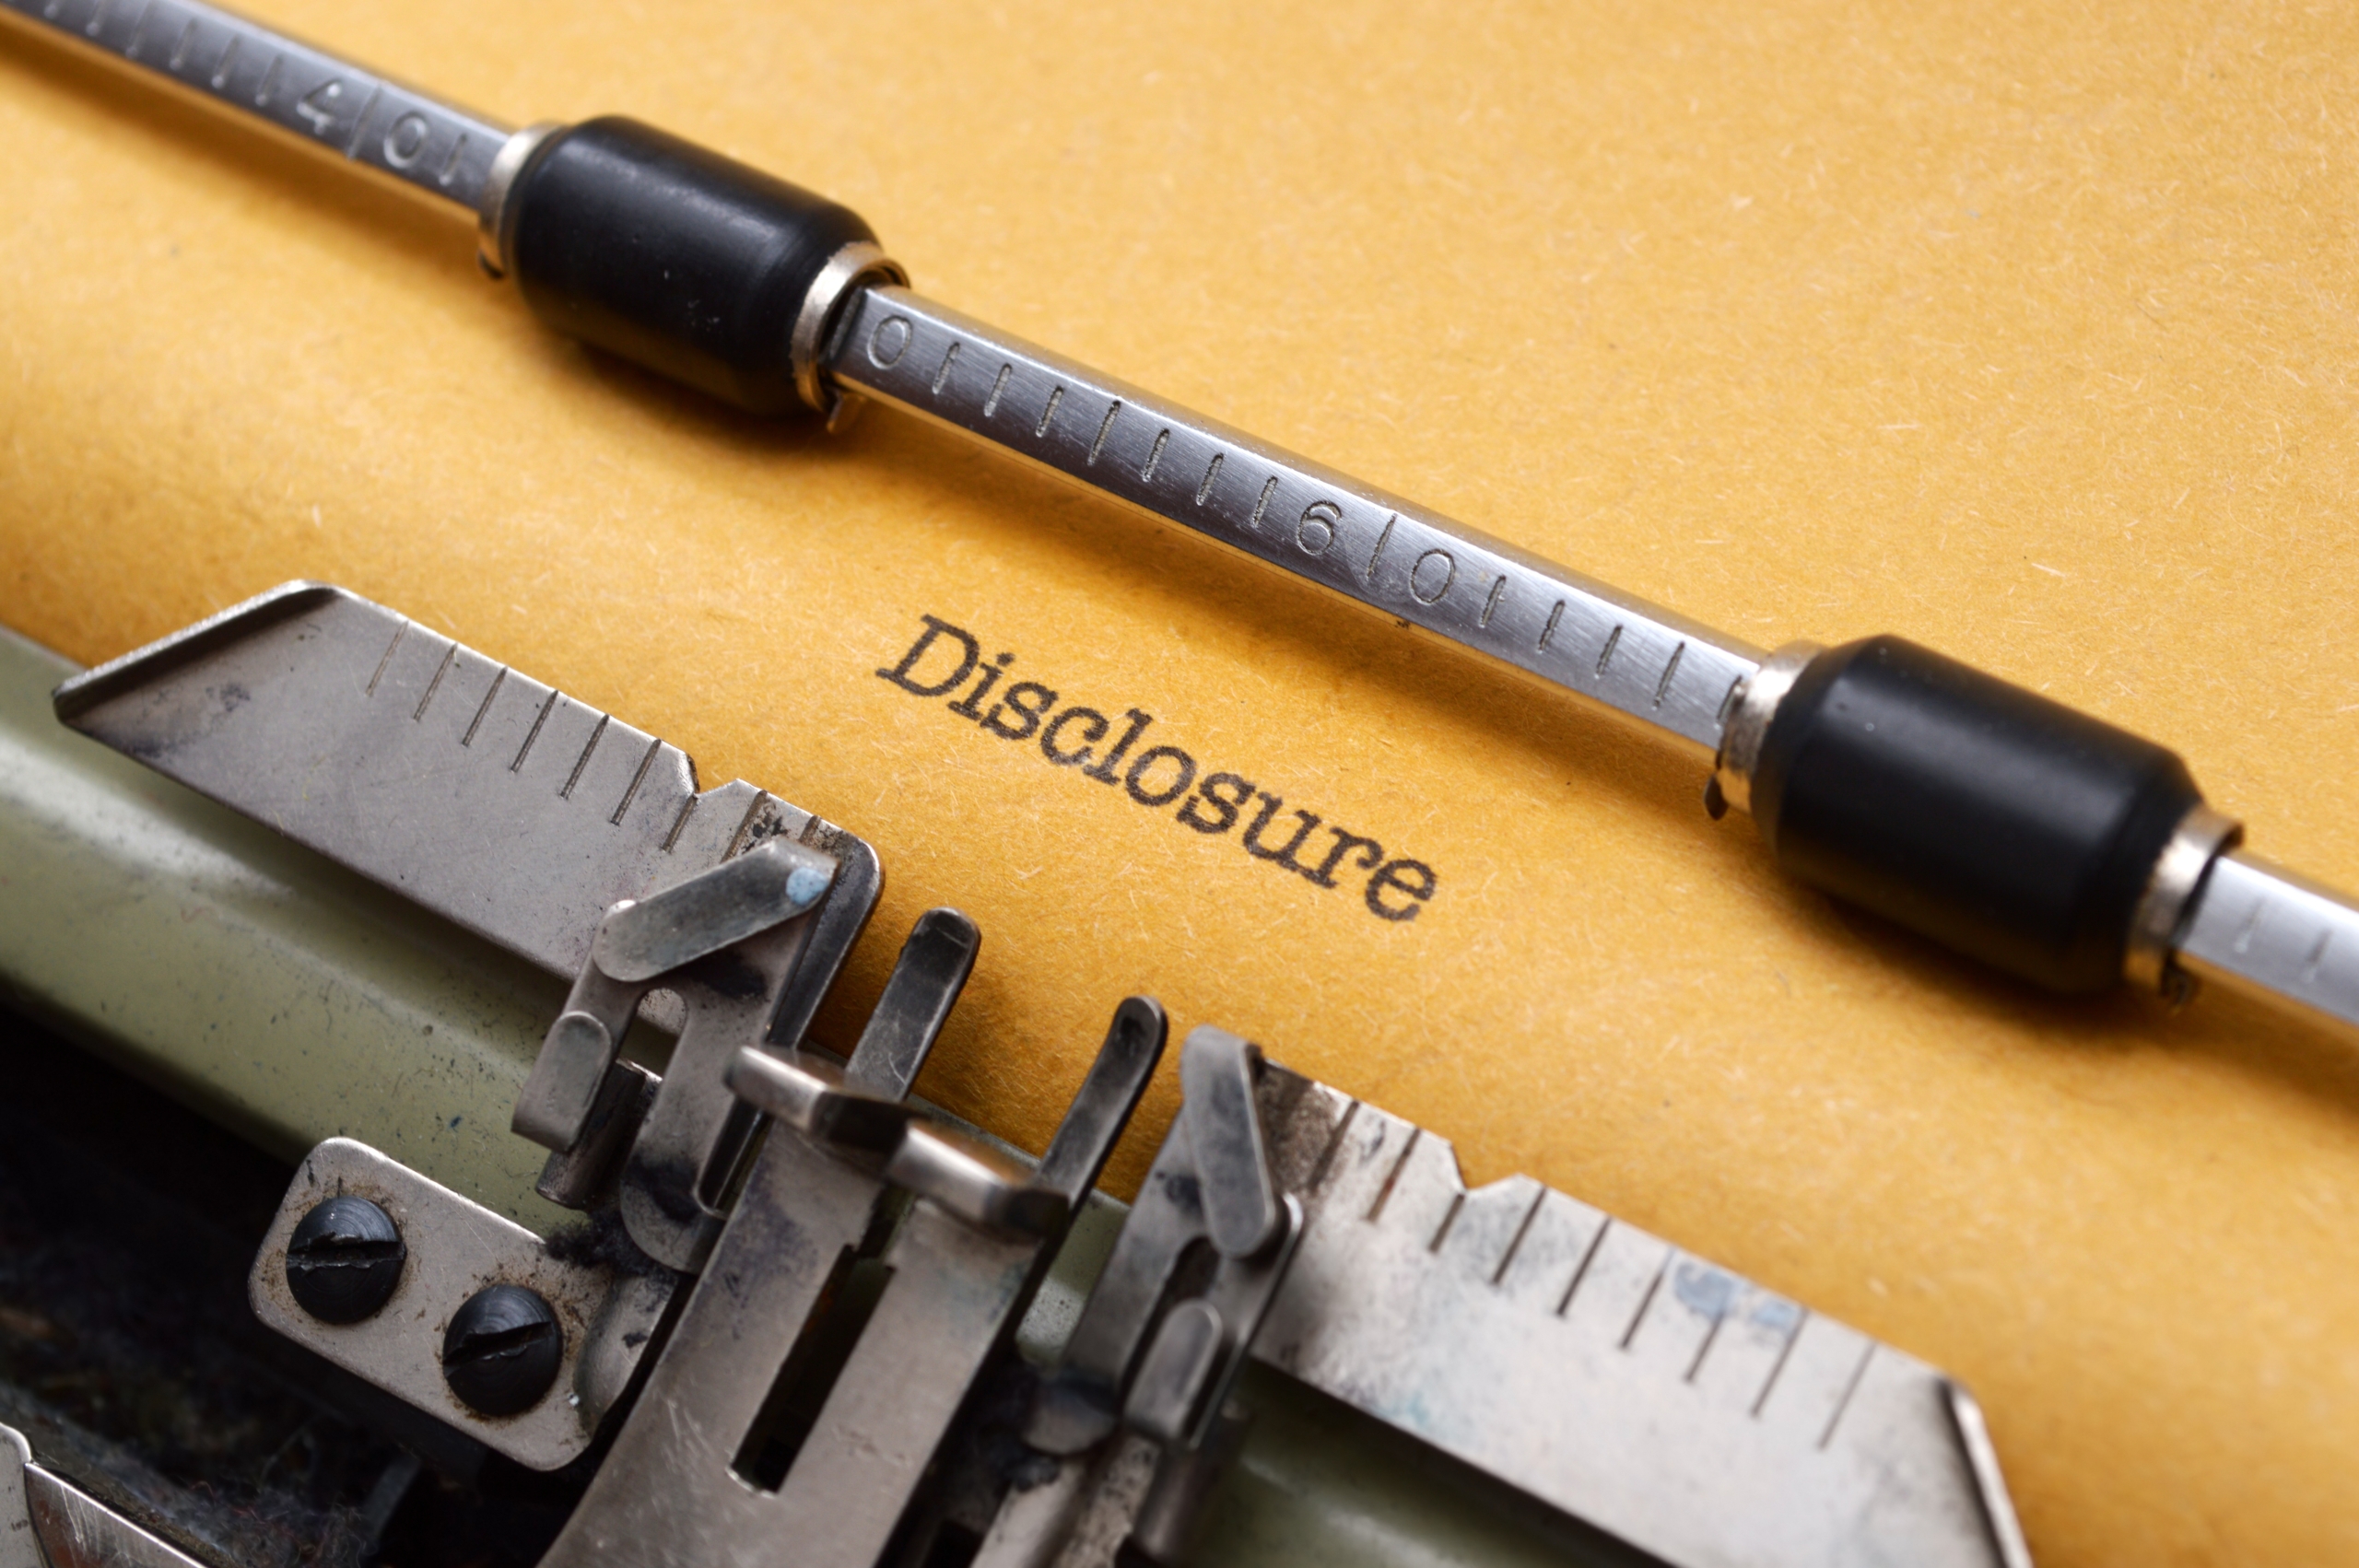 Disclosed information in Divorce